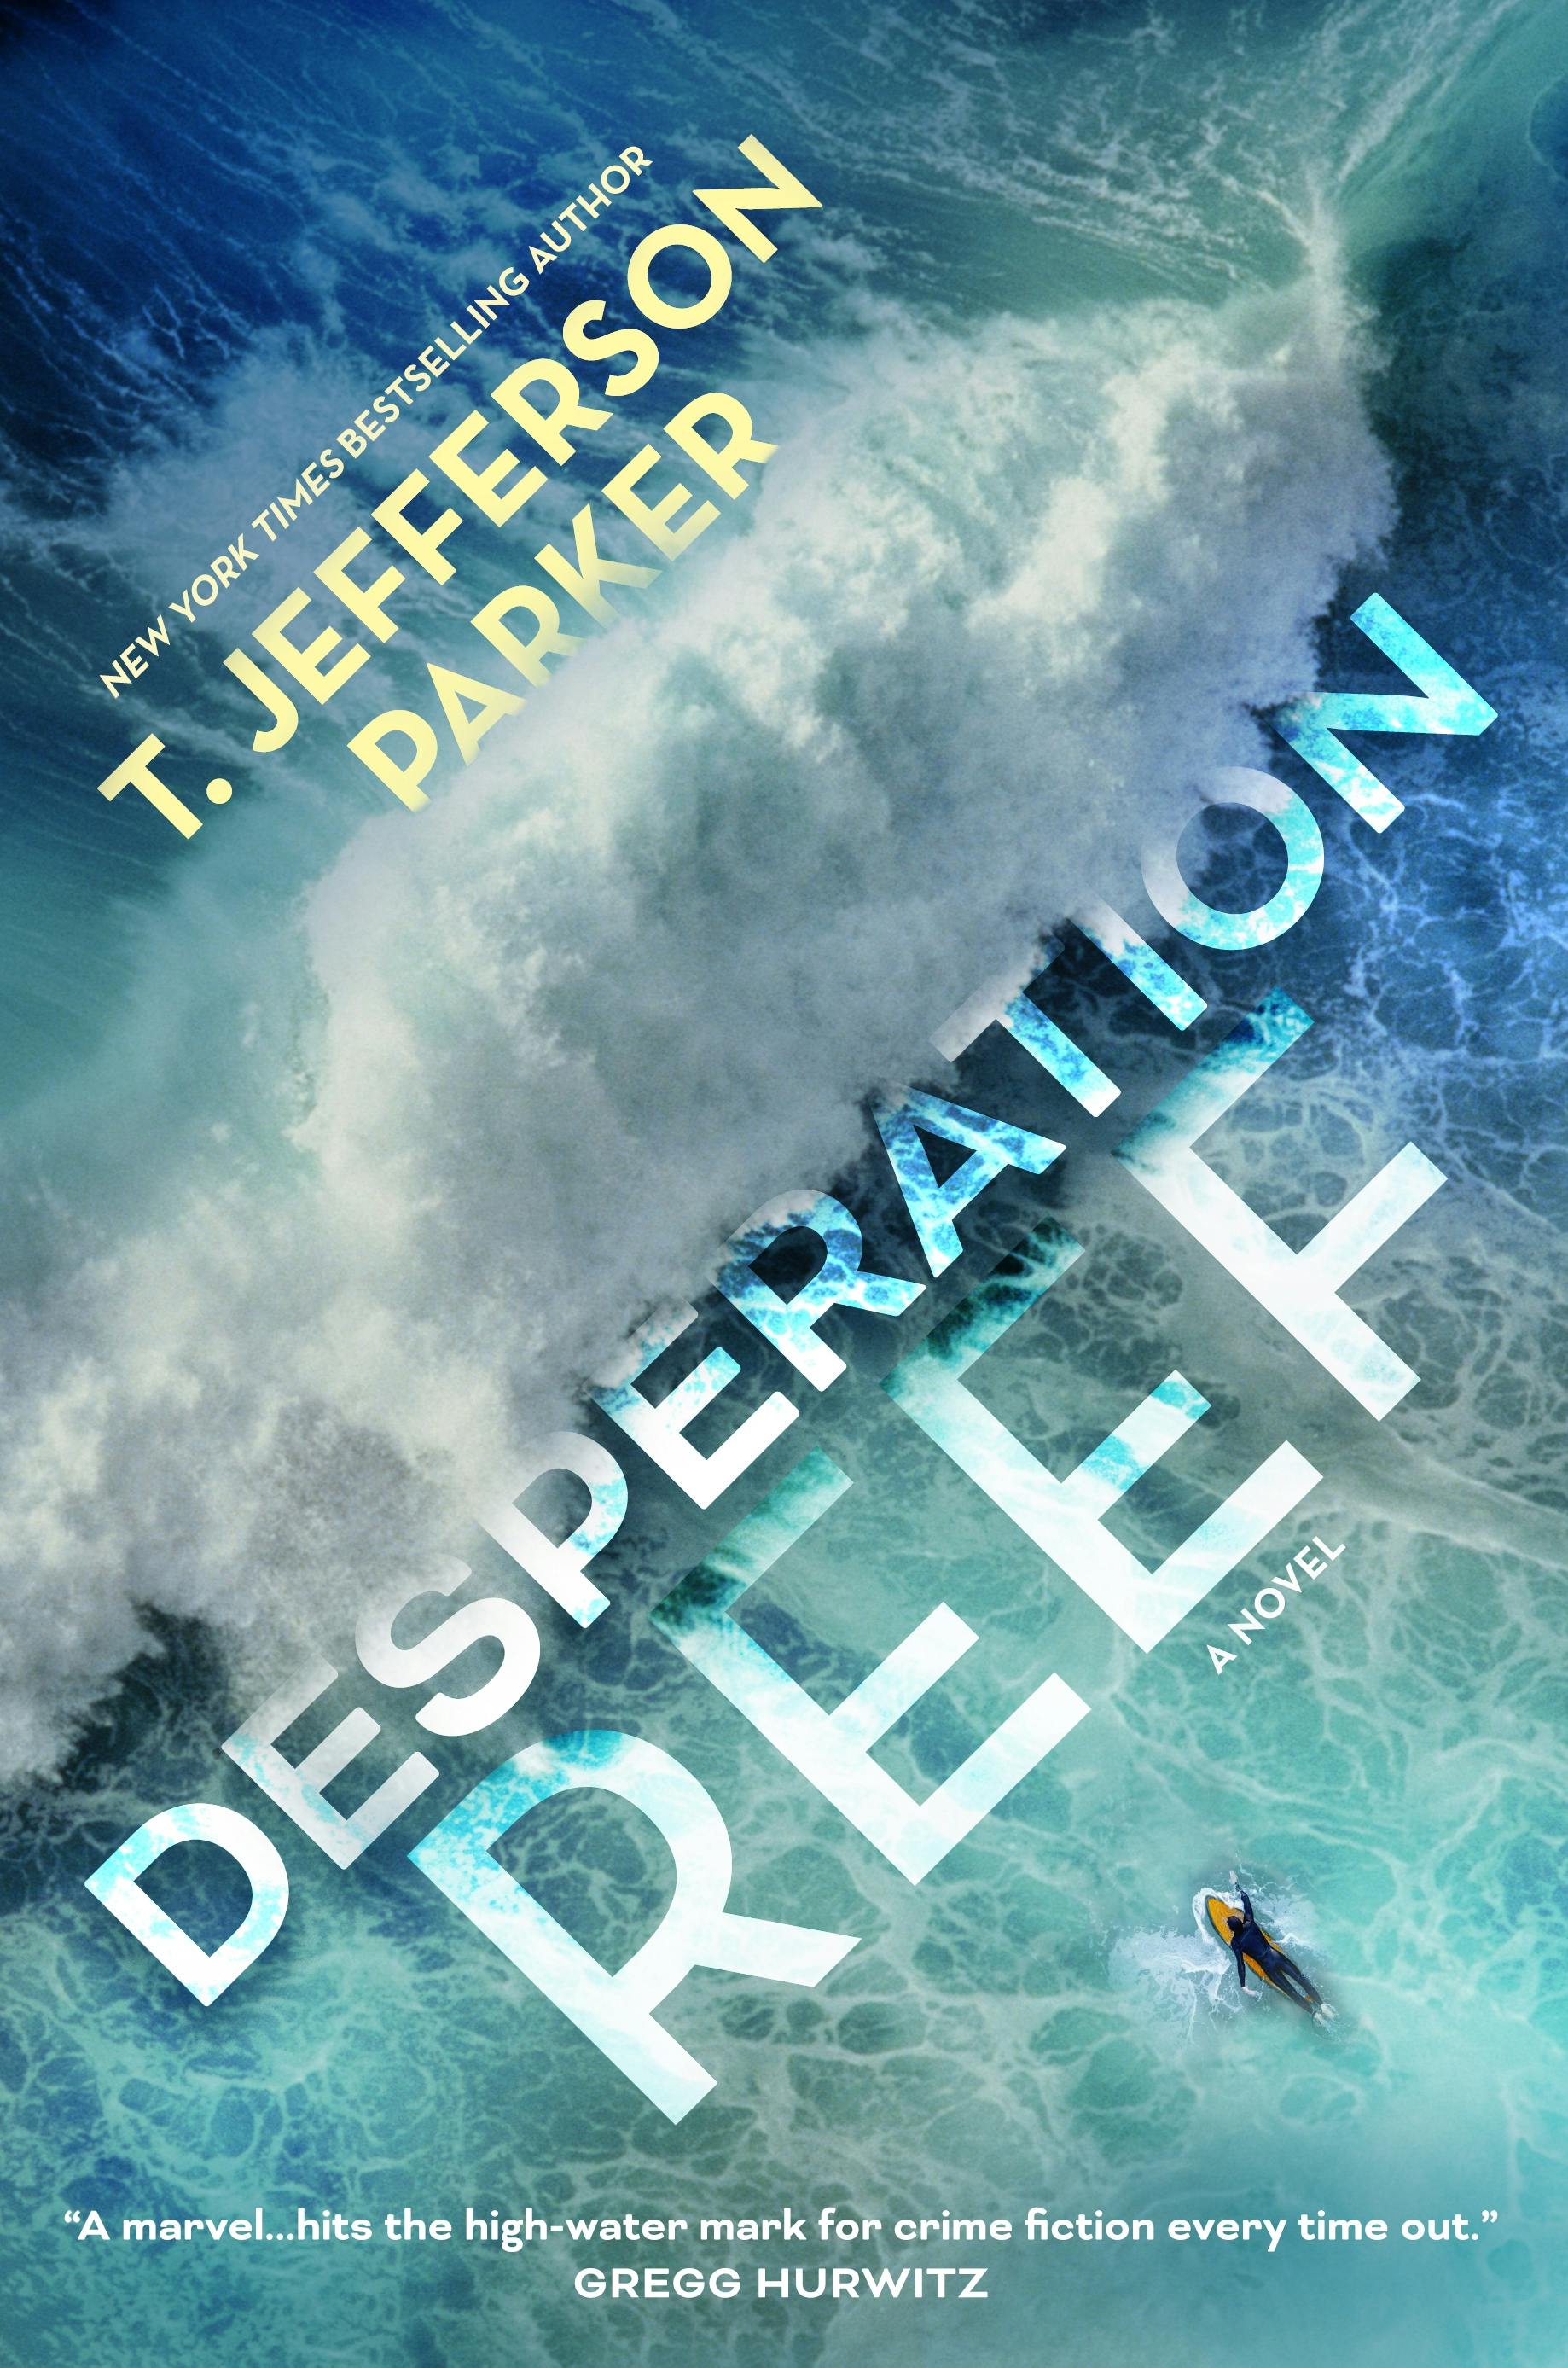 Cover for the book titled as: Desperation Reef